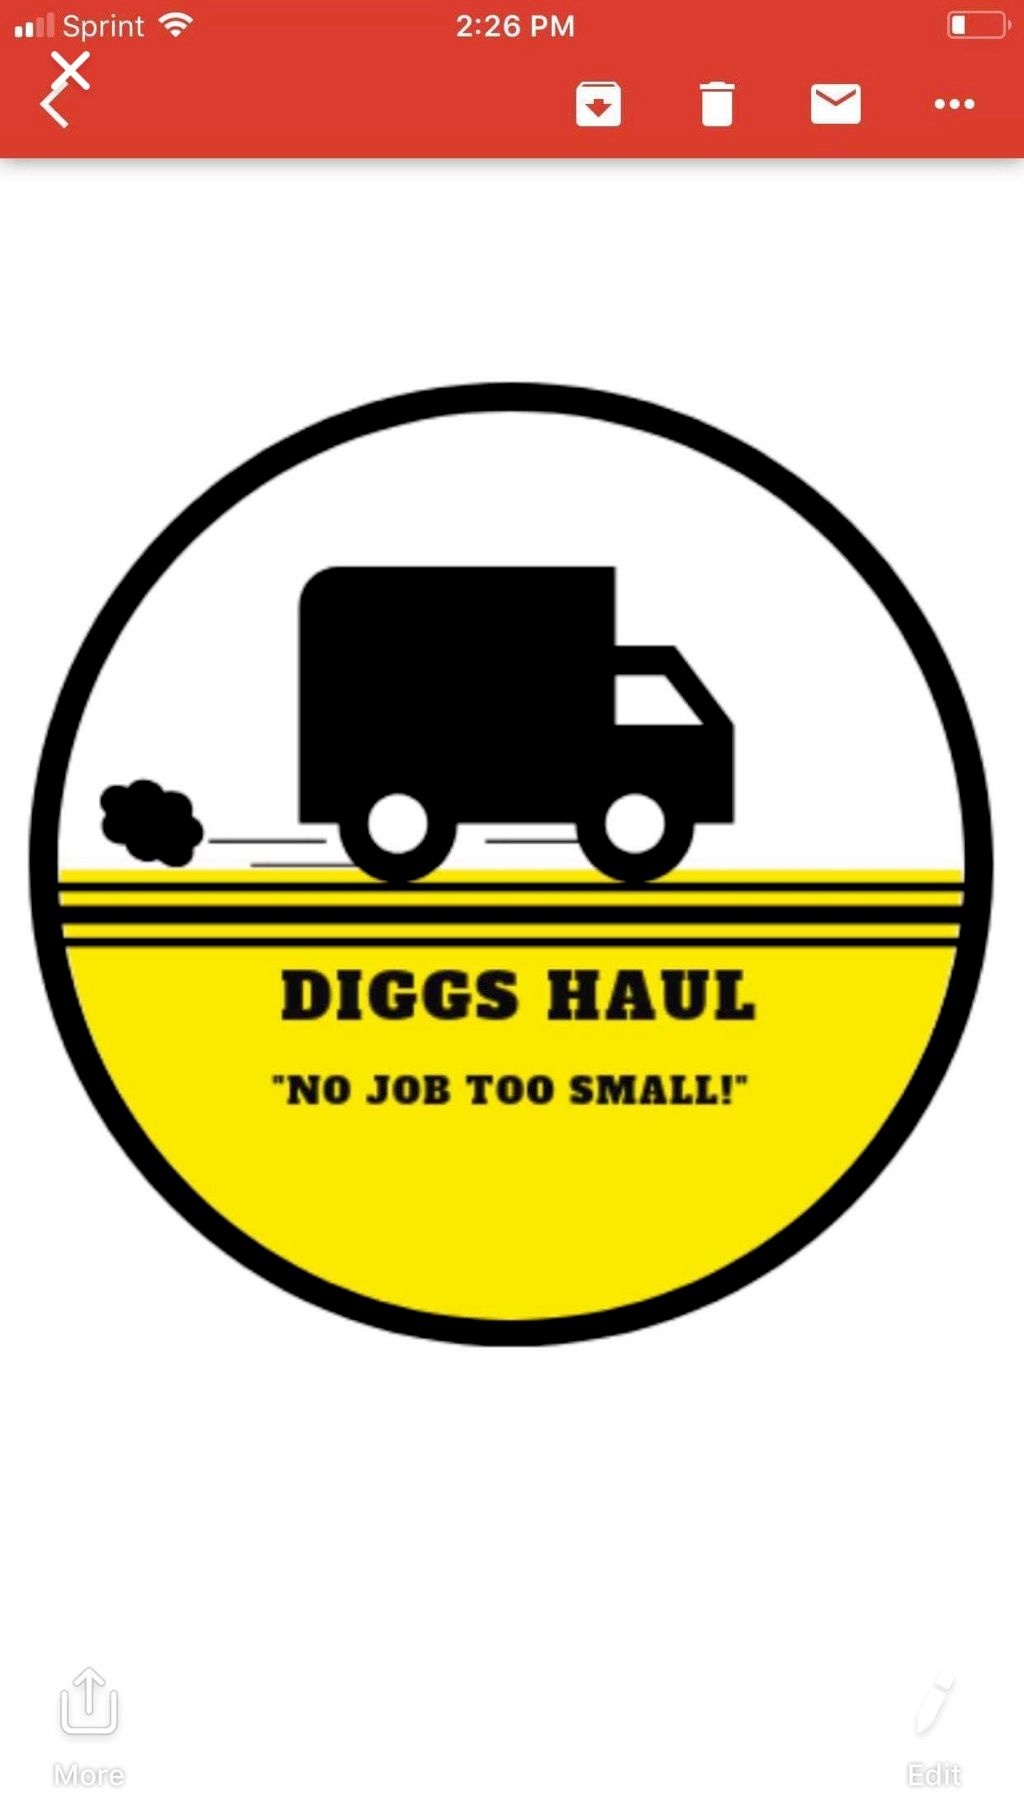 Diggs Haul Incorporated